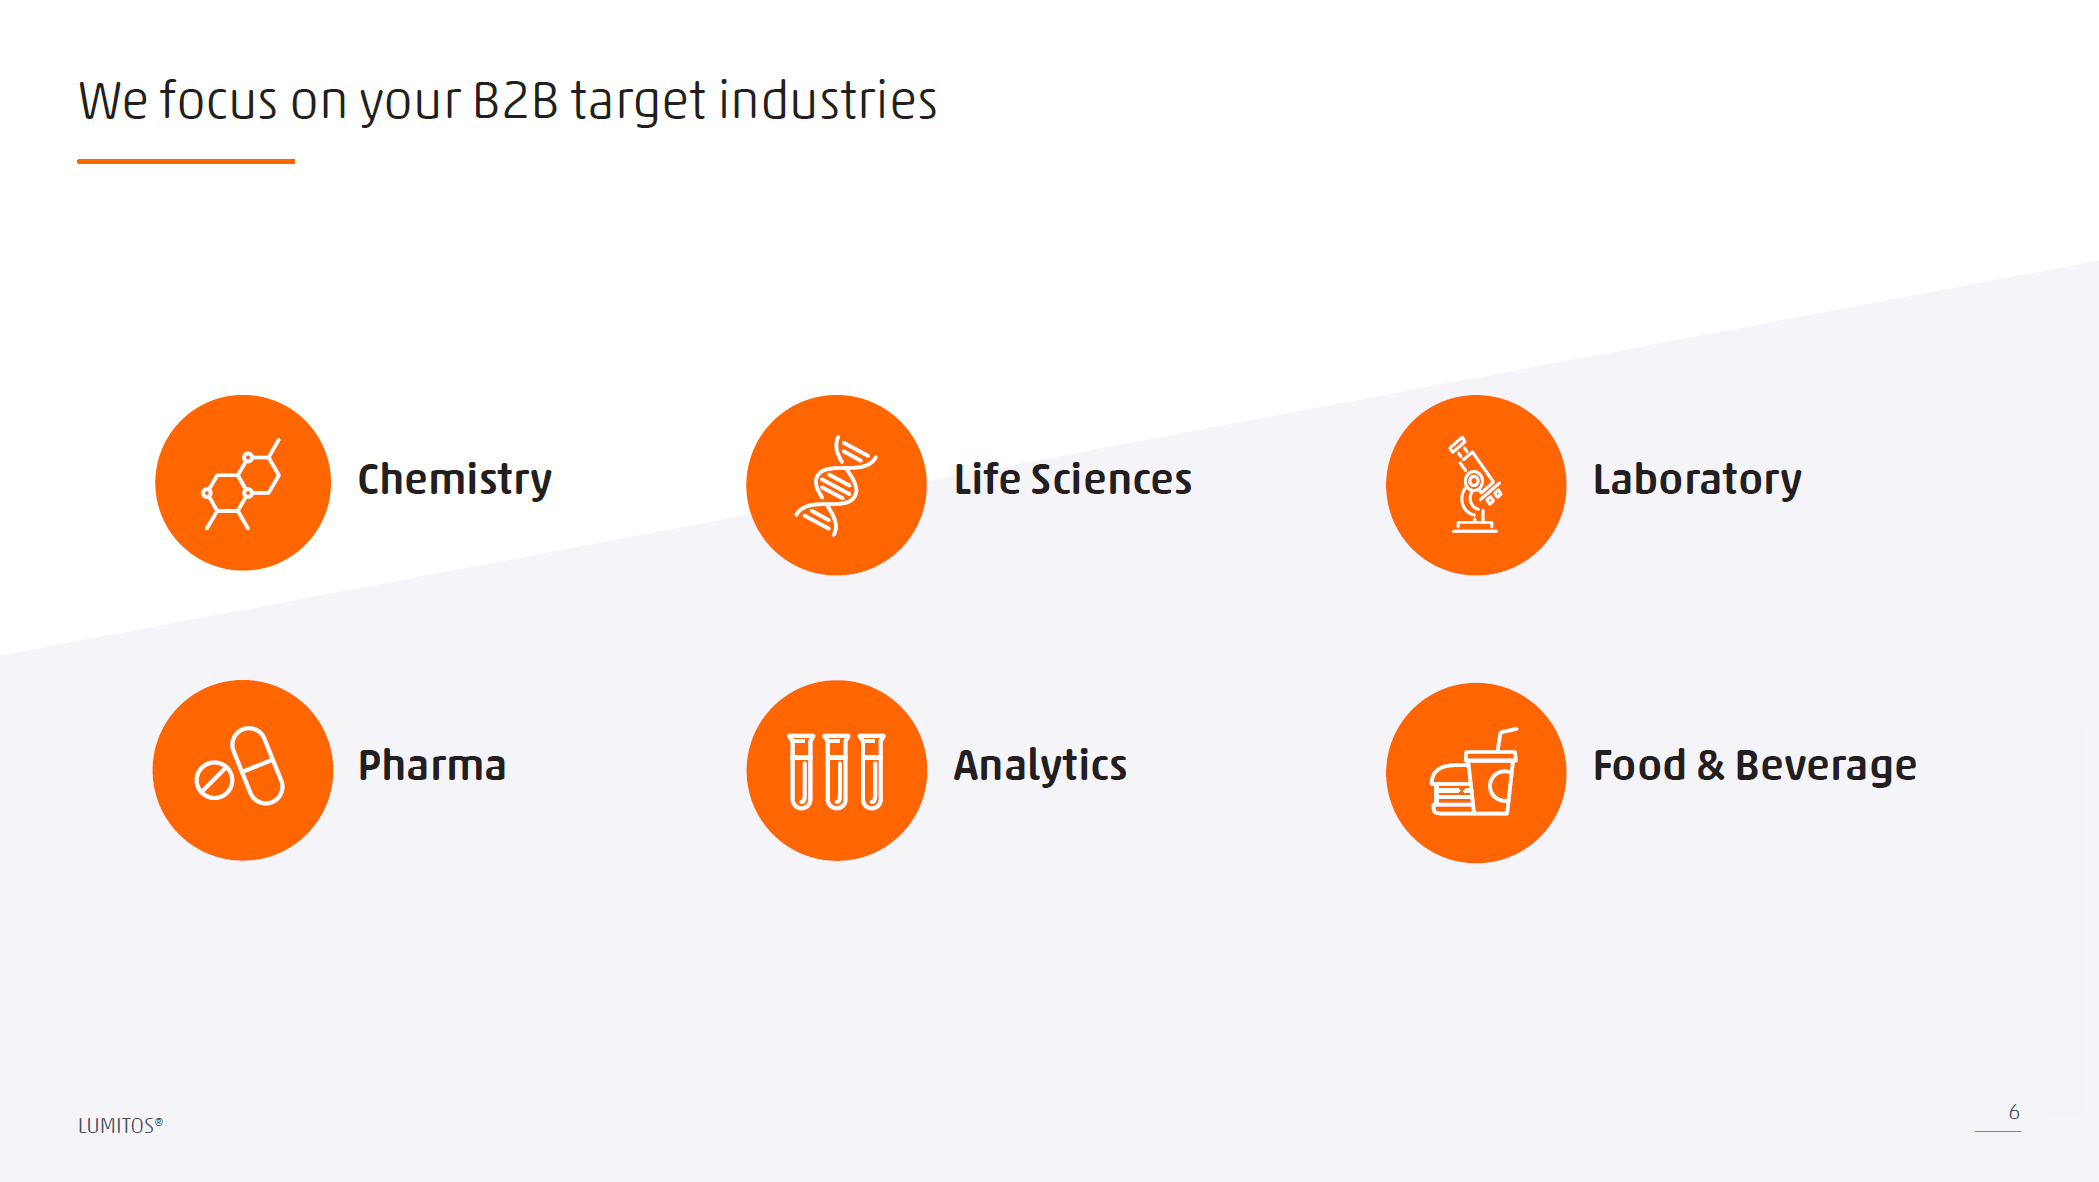 We have your B2B target sectors in our focus